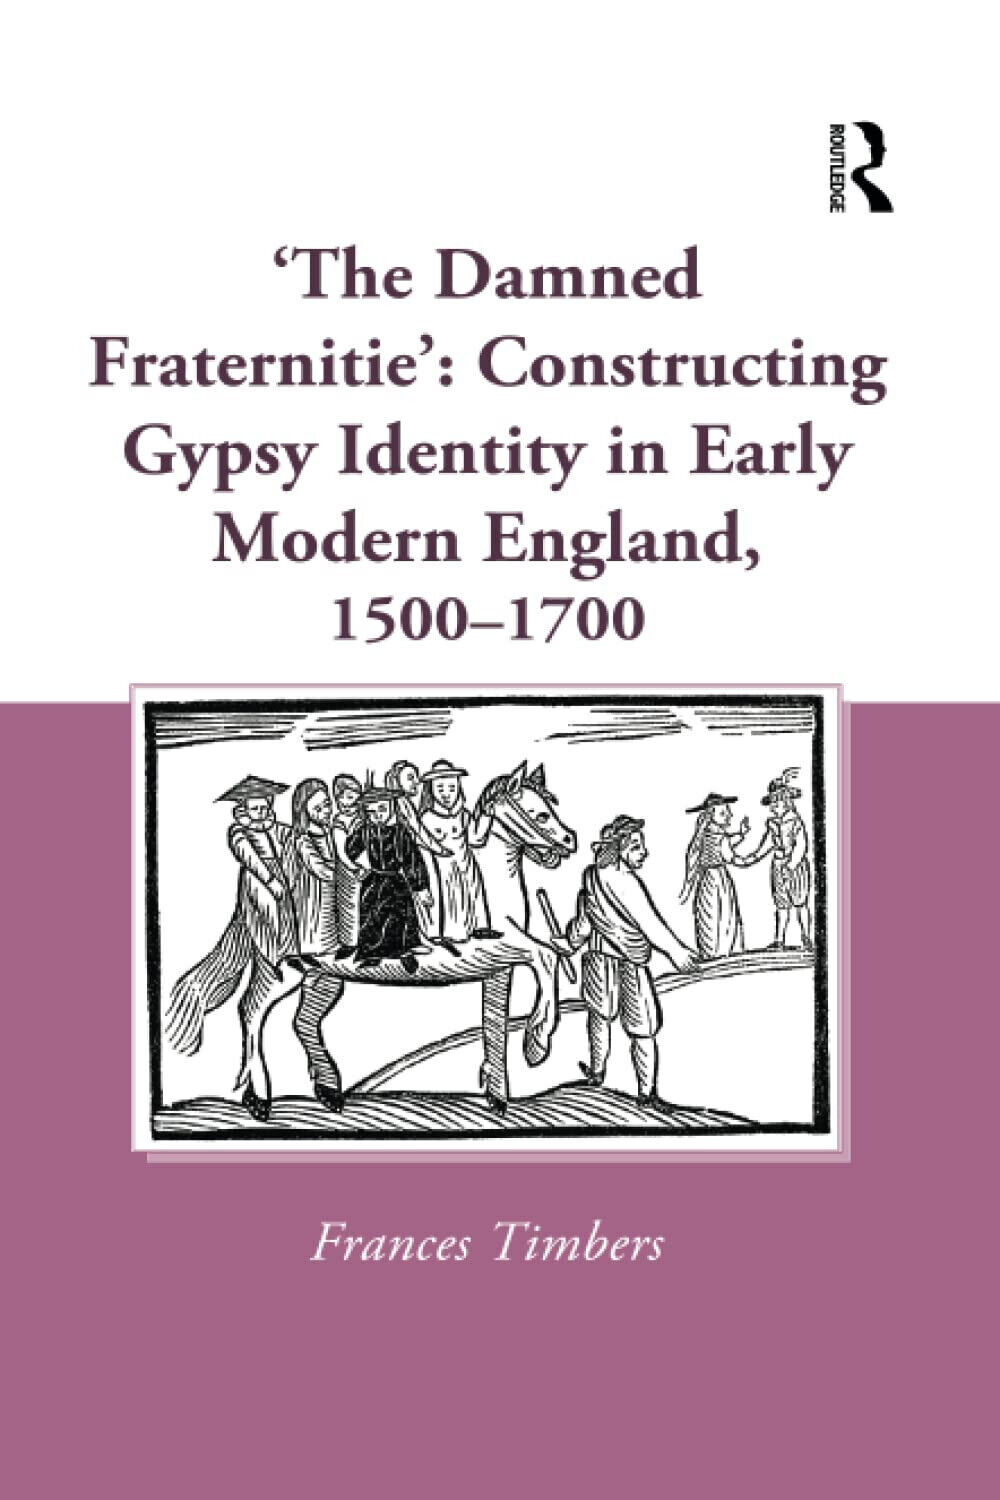 'The Damned Fraternitie': Constructing Gypsy Identity In Early Modern England